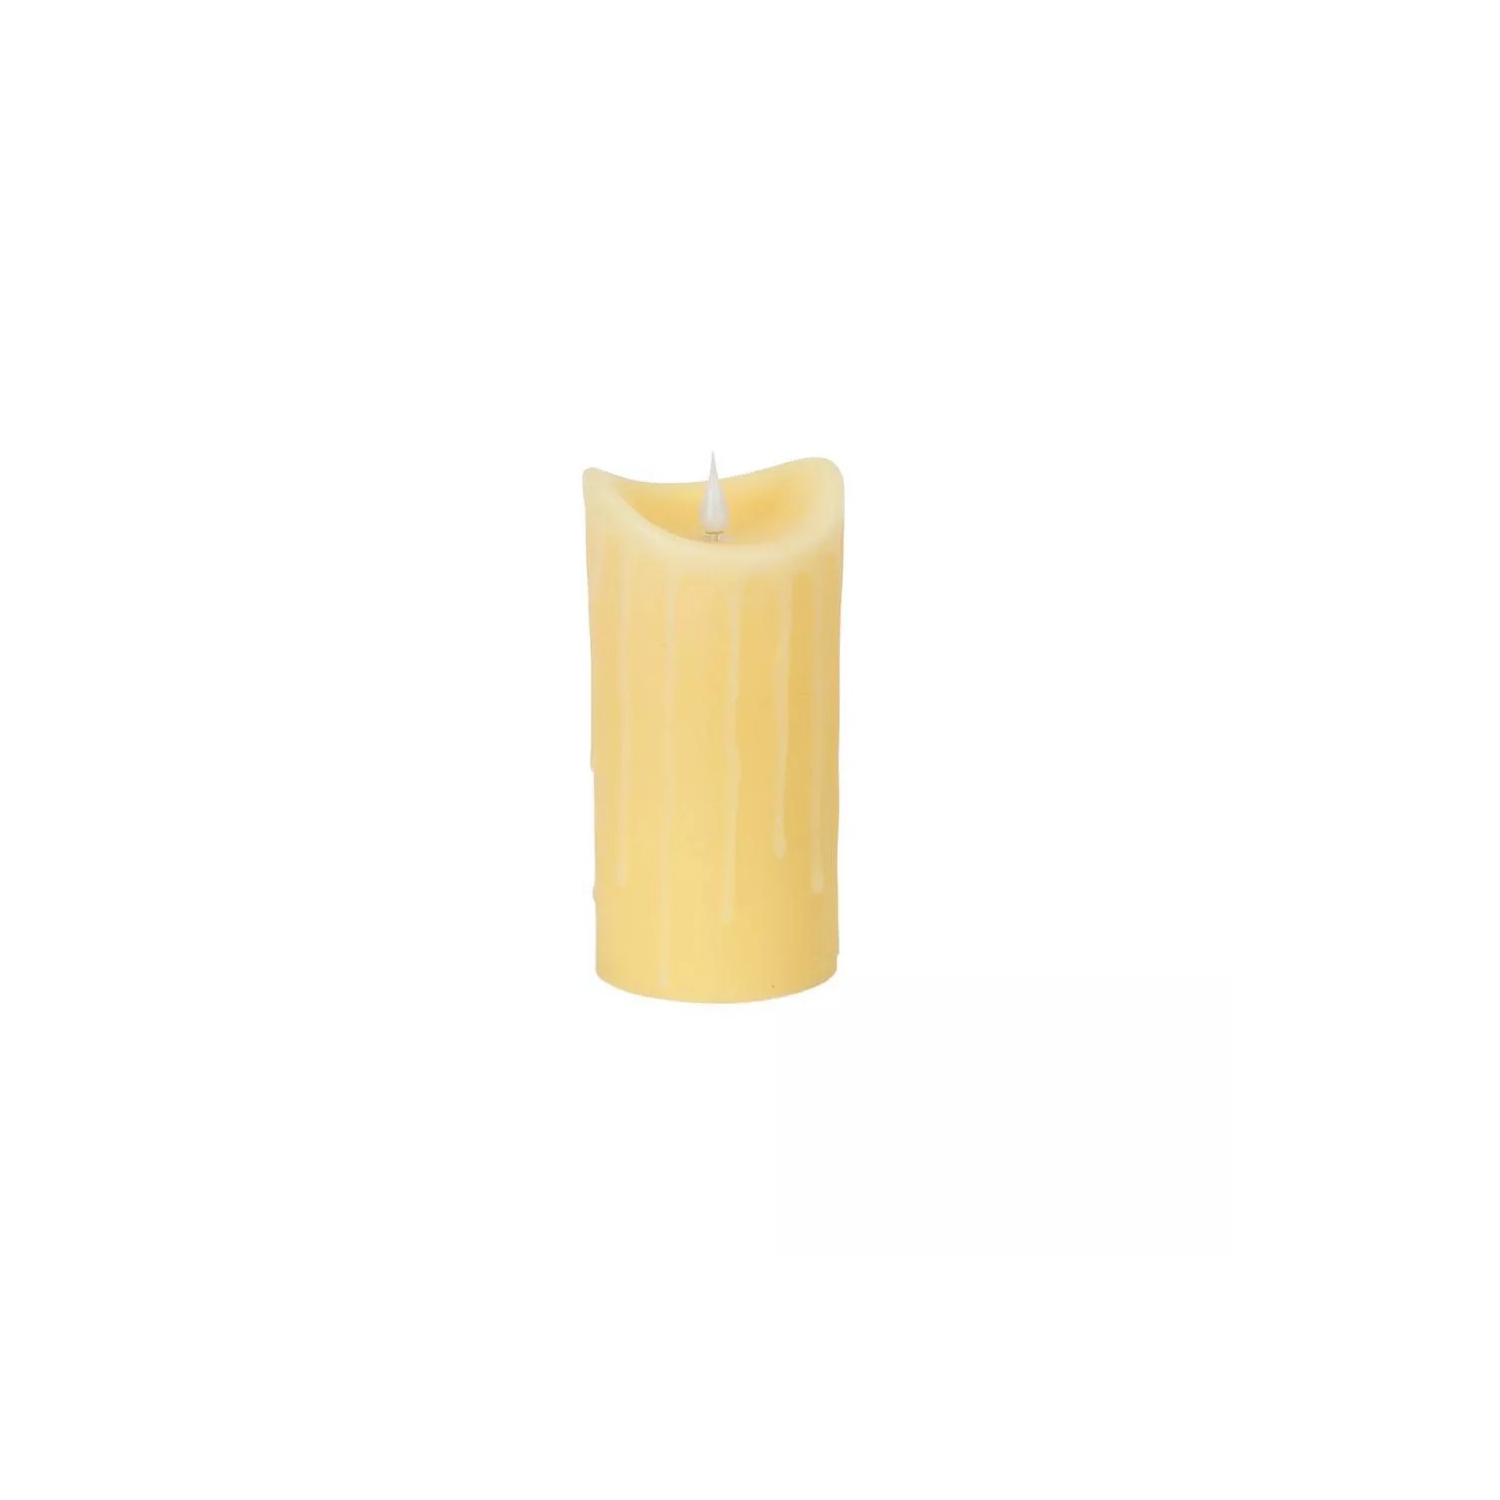 7" Simplux Dripping Wax LED Lighted Flameless Candle - Ivory